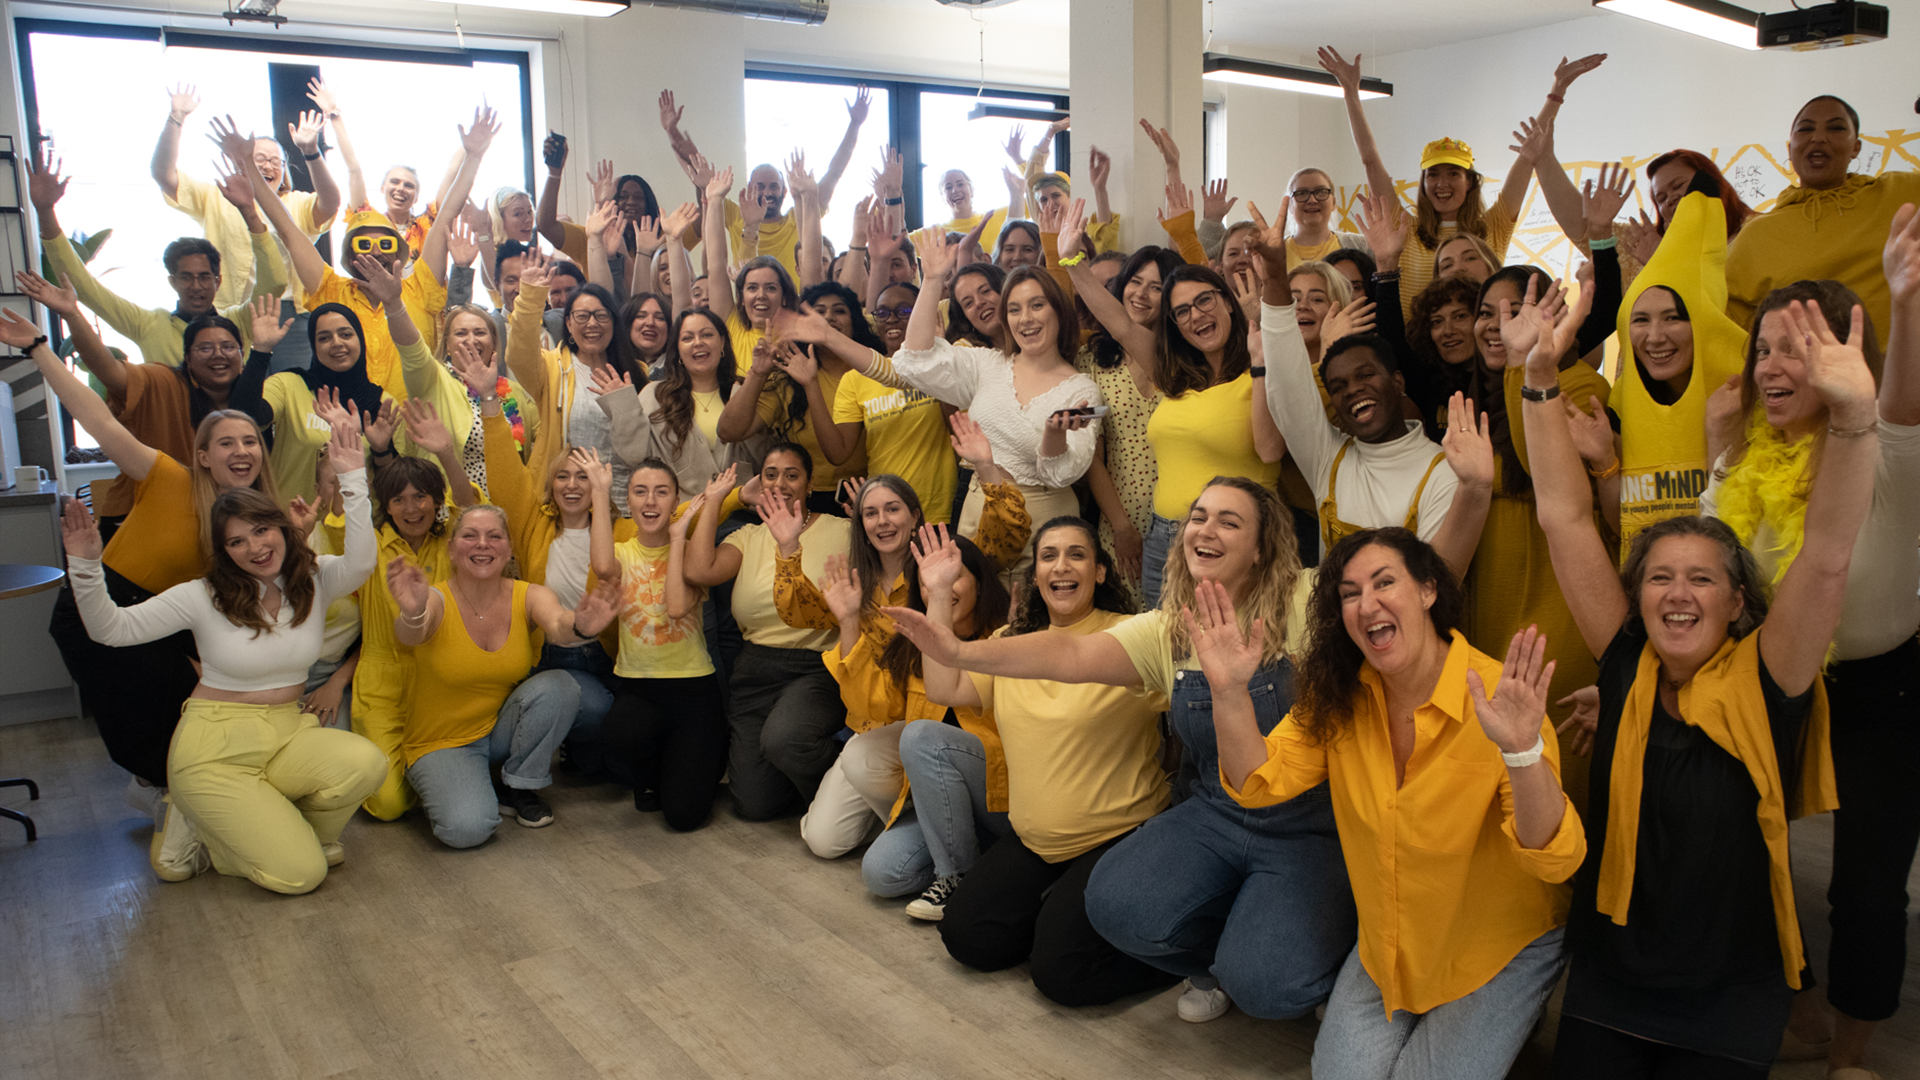 YoungMinds staff all wearing yellow for #HelloYellow 2023, posing with their hands in the air.